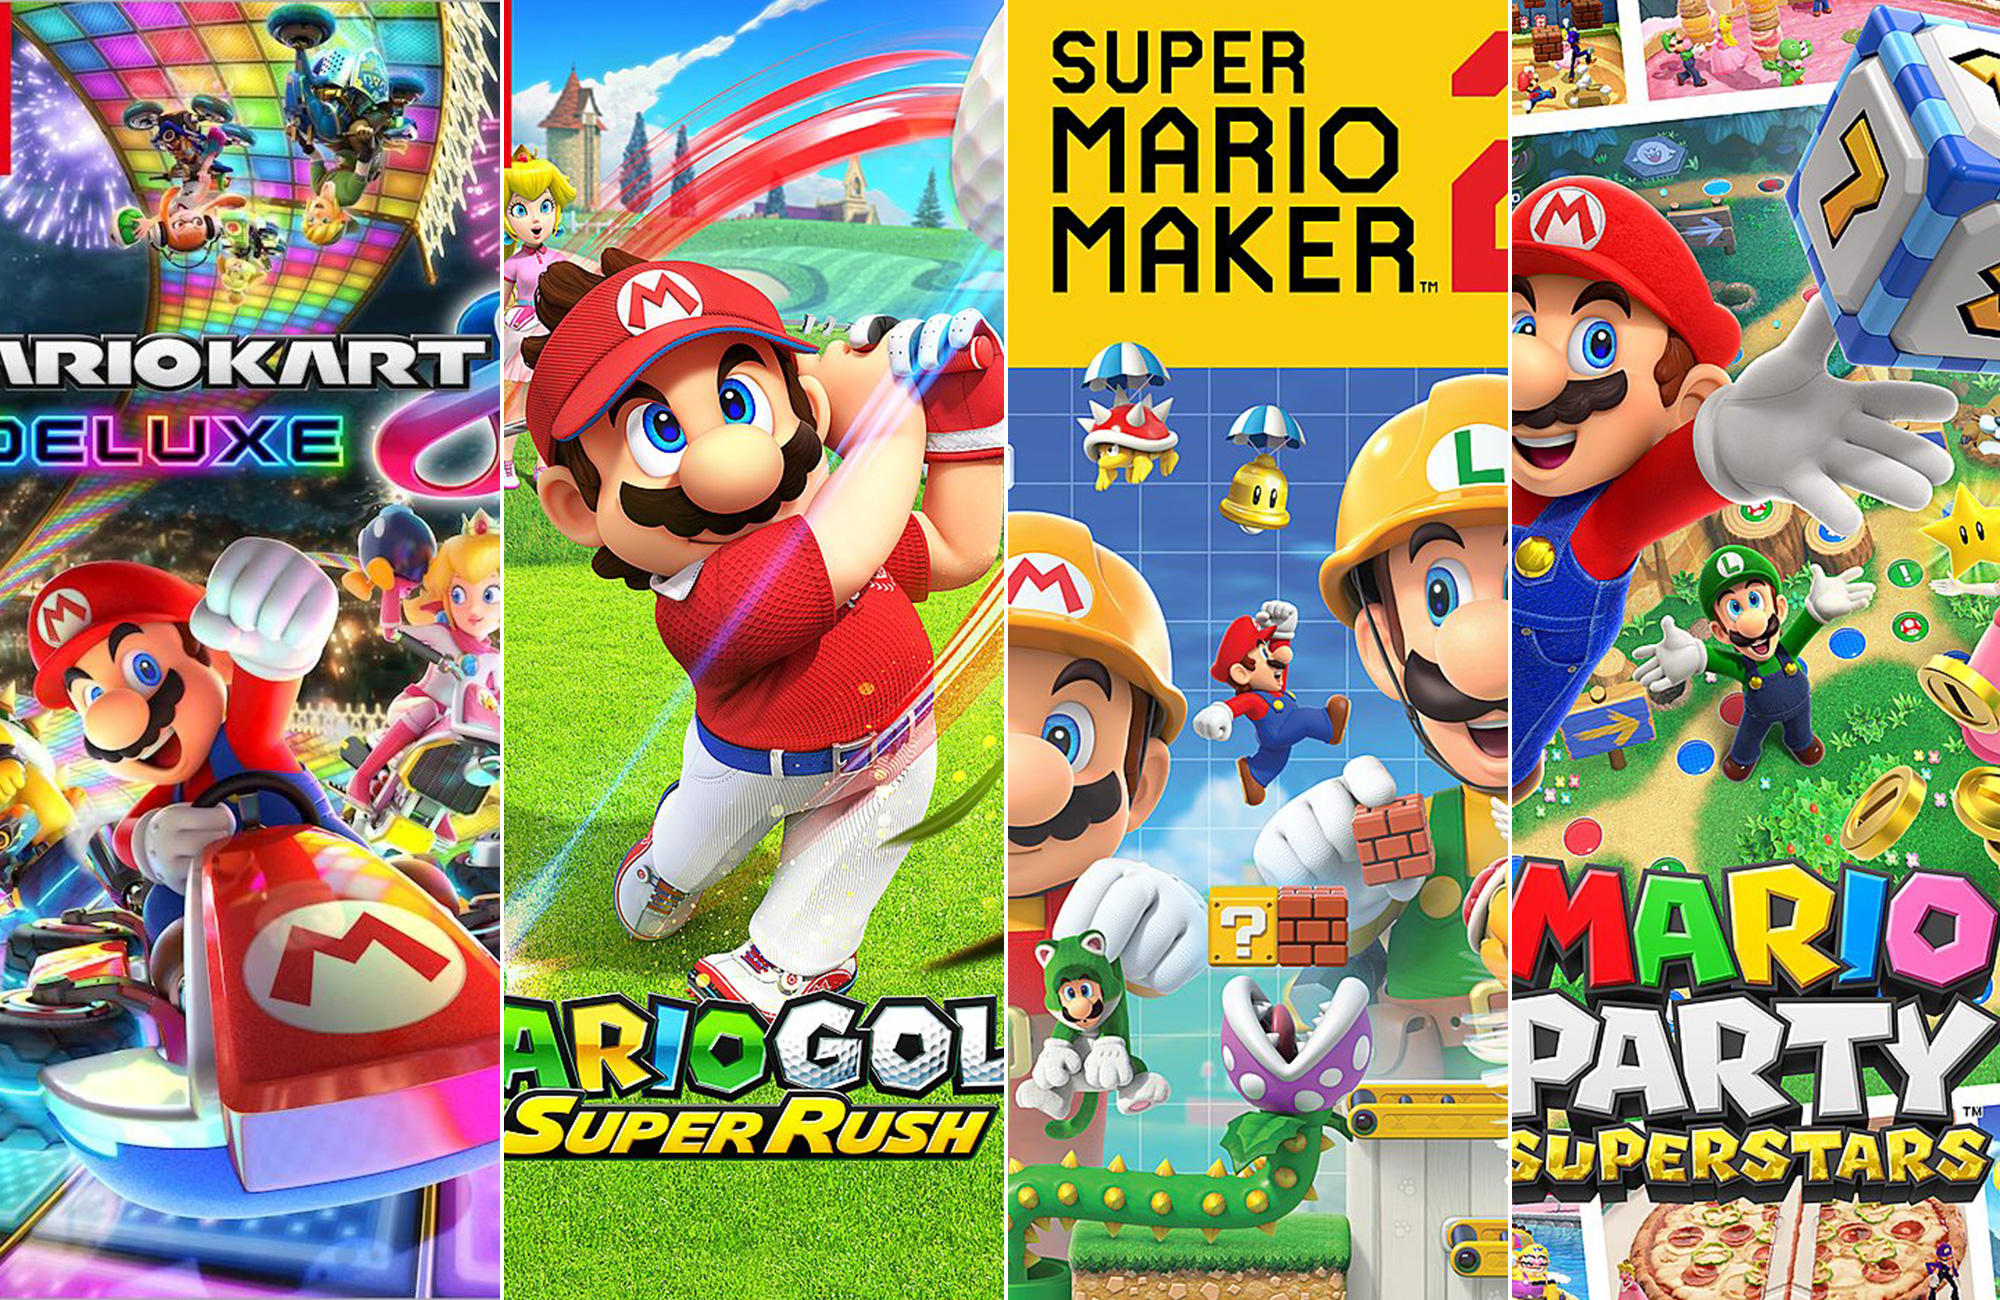 Mar10 deals on Nintendo Switch games. This is a compilation image of mario kart, mario party, mario maker, and mario golf